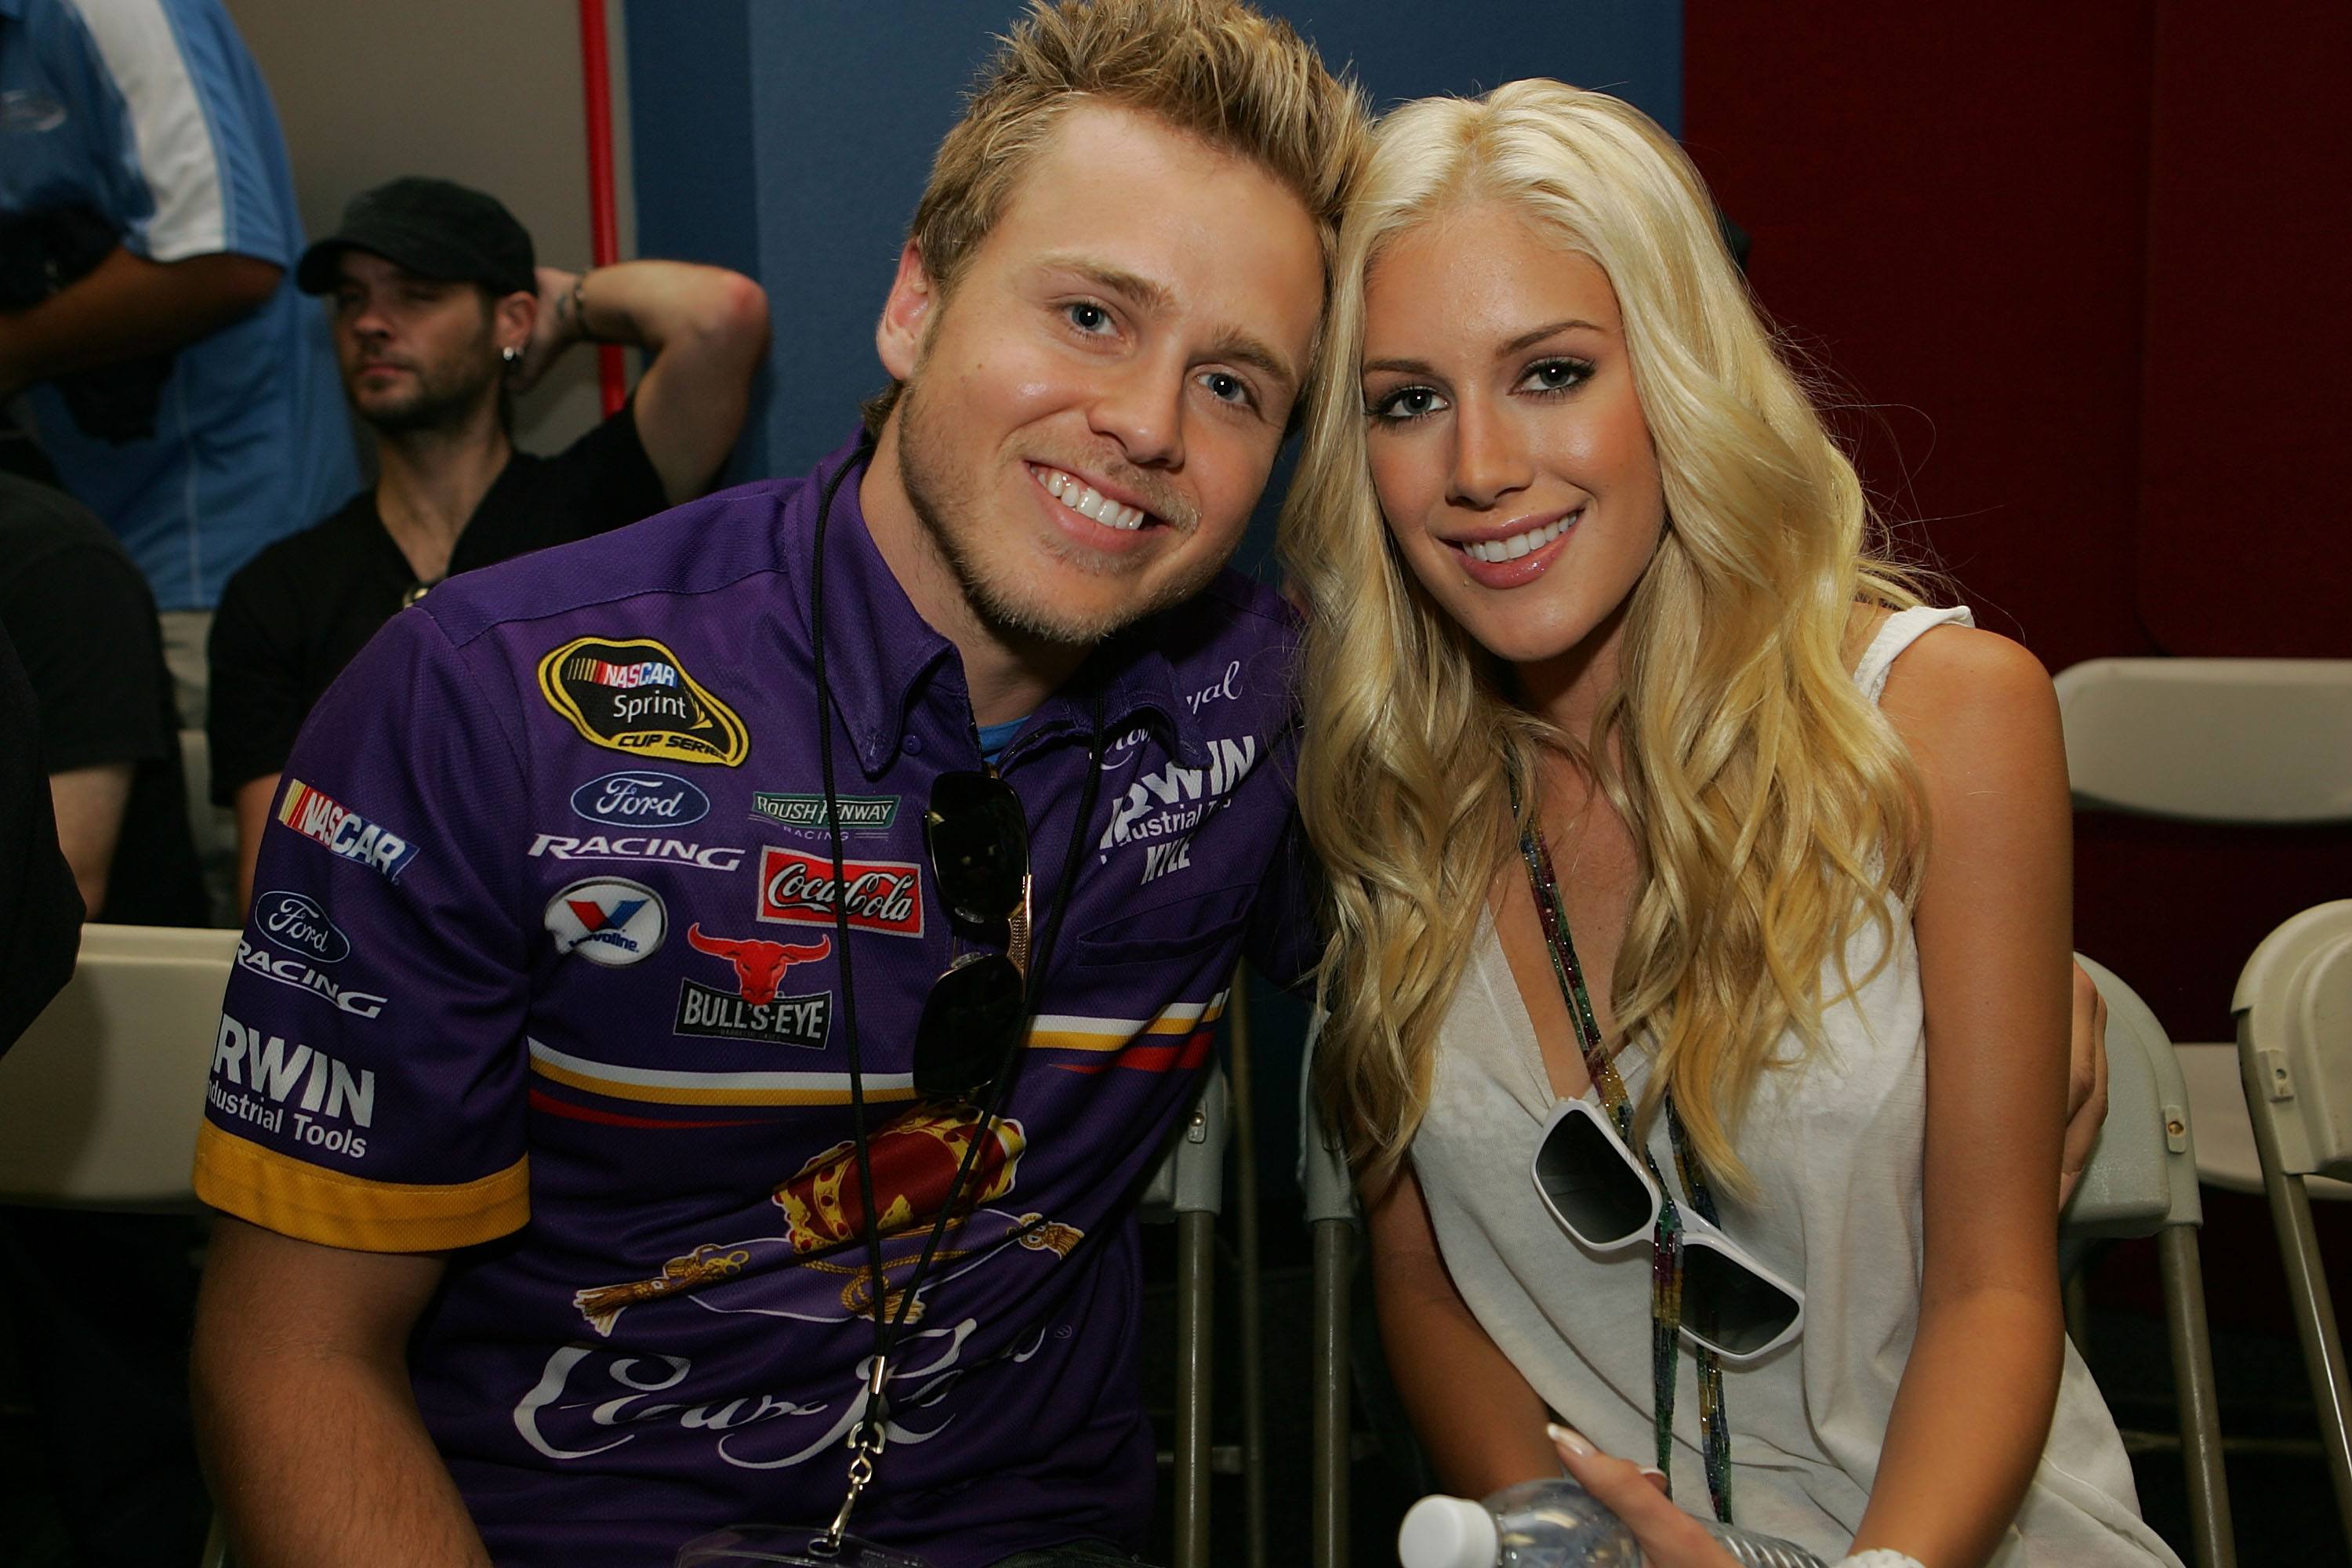 Spencer Pratt and Heidi Montag during the NASCAR Sprint Cup Series Pepsi 500 at Auto Club Speedway on August 31, 2008 in Fontana, California.